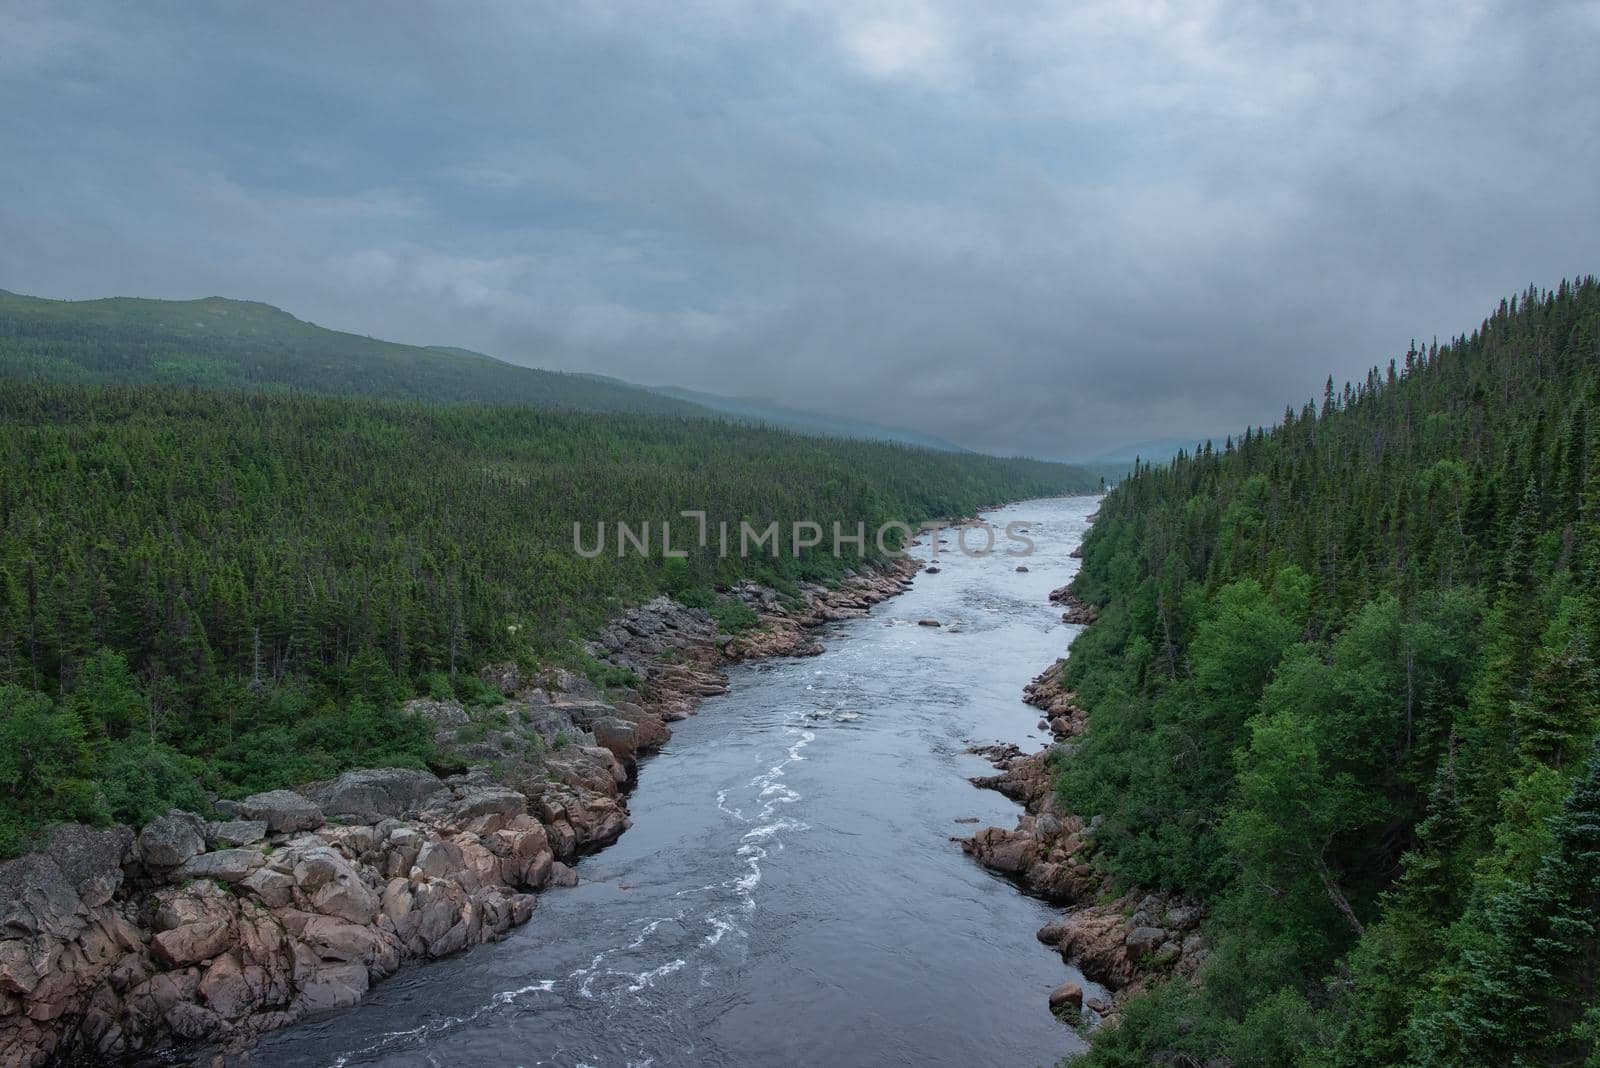 Pinware River flows in the Mists of Labrador and Newfoundland